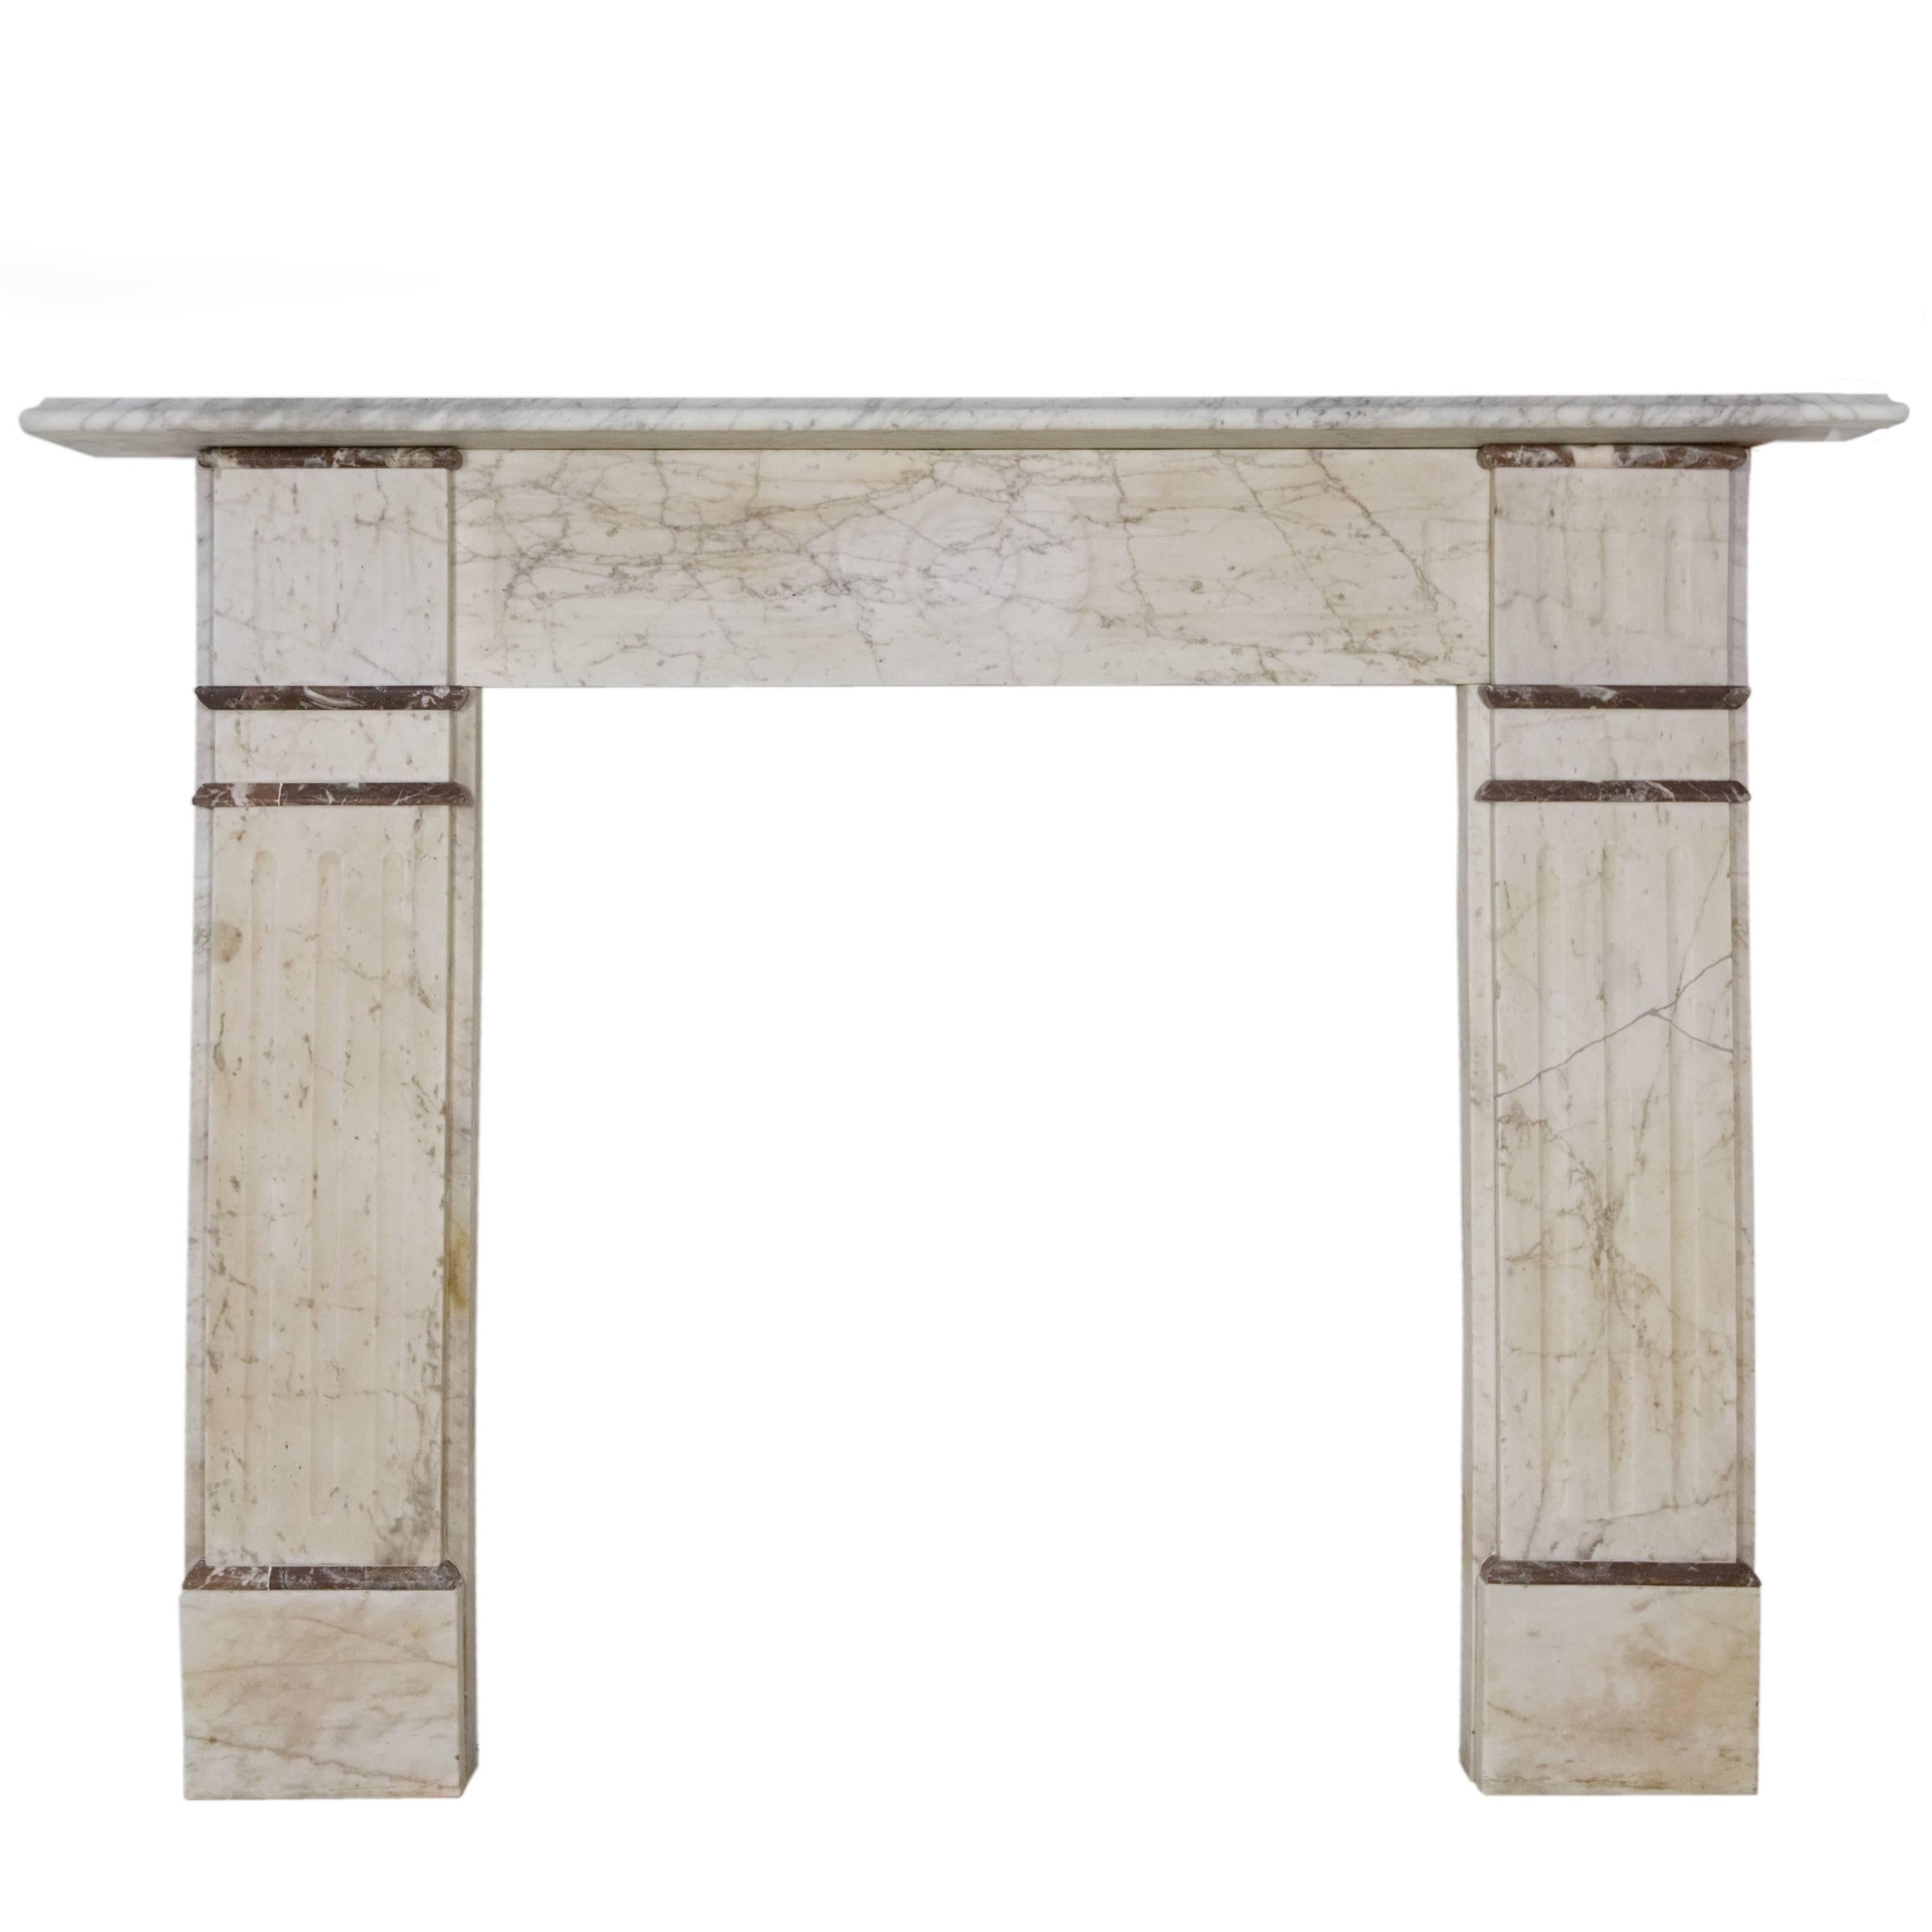 19th Century English Victorian Marble Fireplace Surround